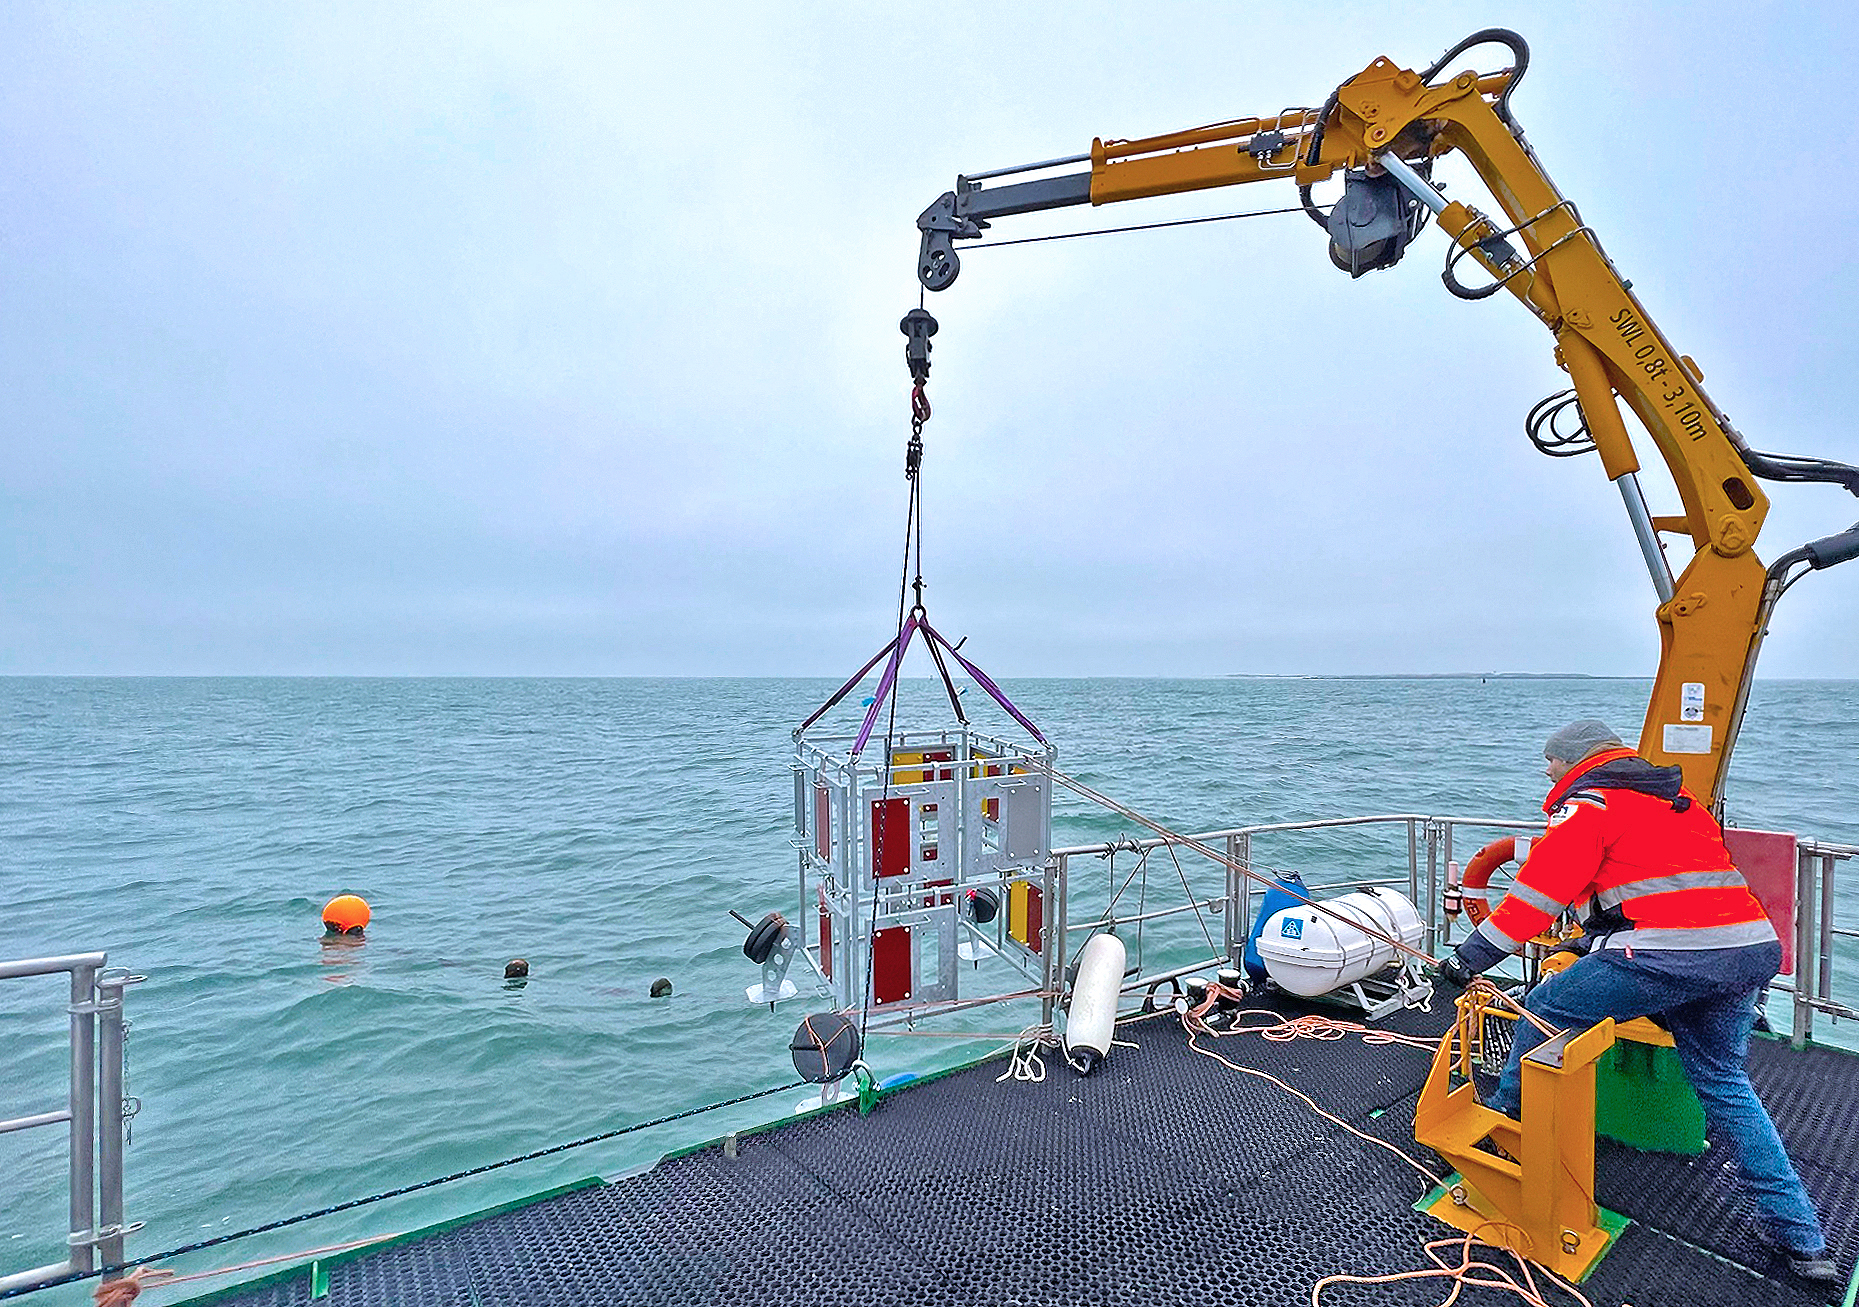 Deployment of the underwater lander off the island of Helgoland